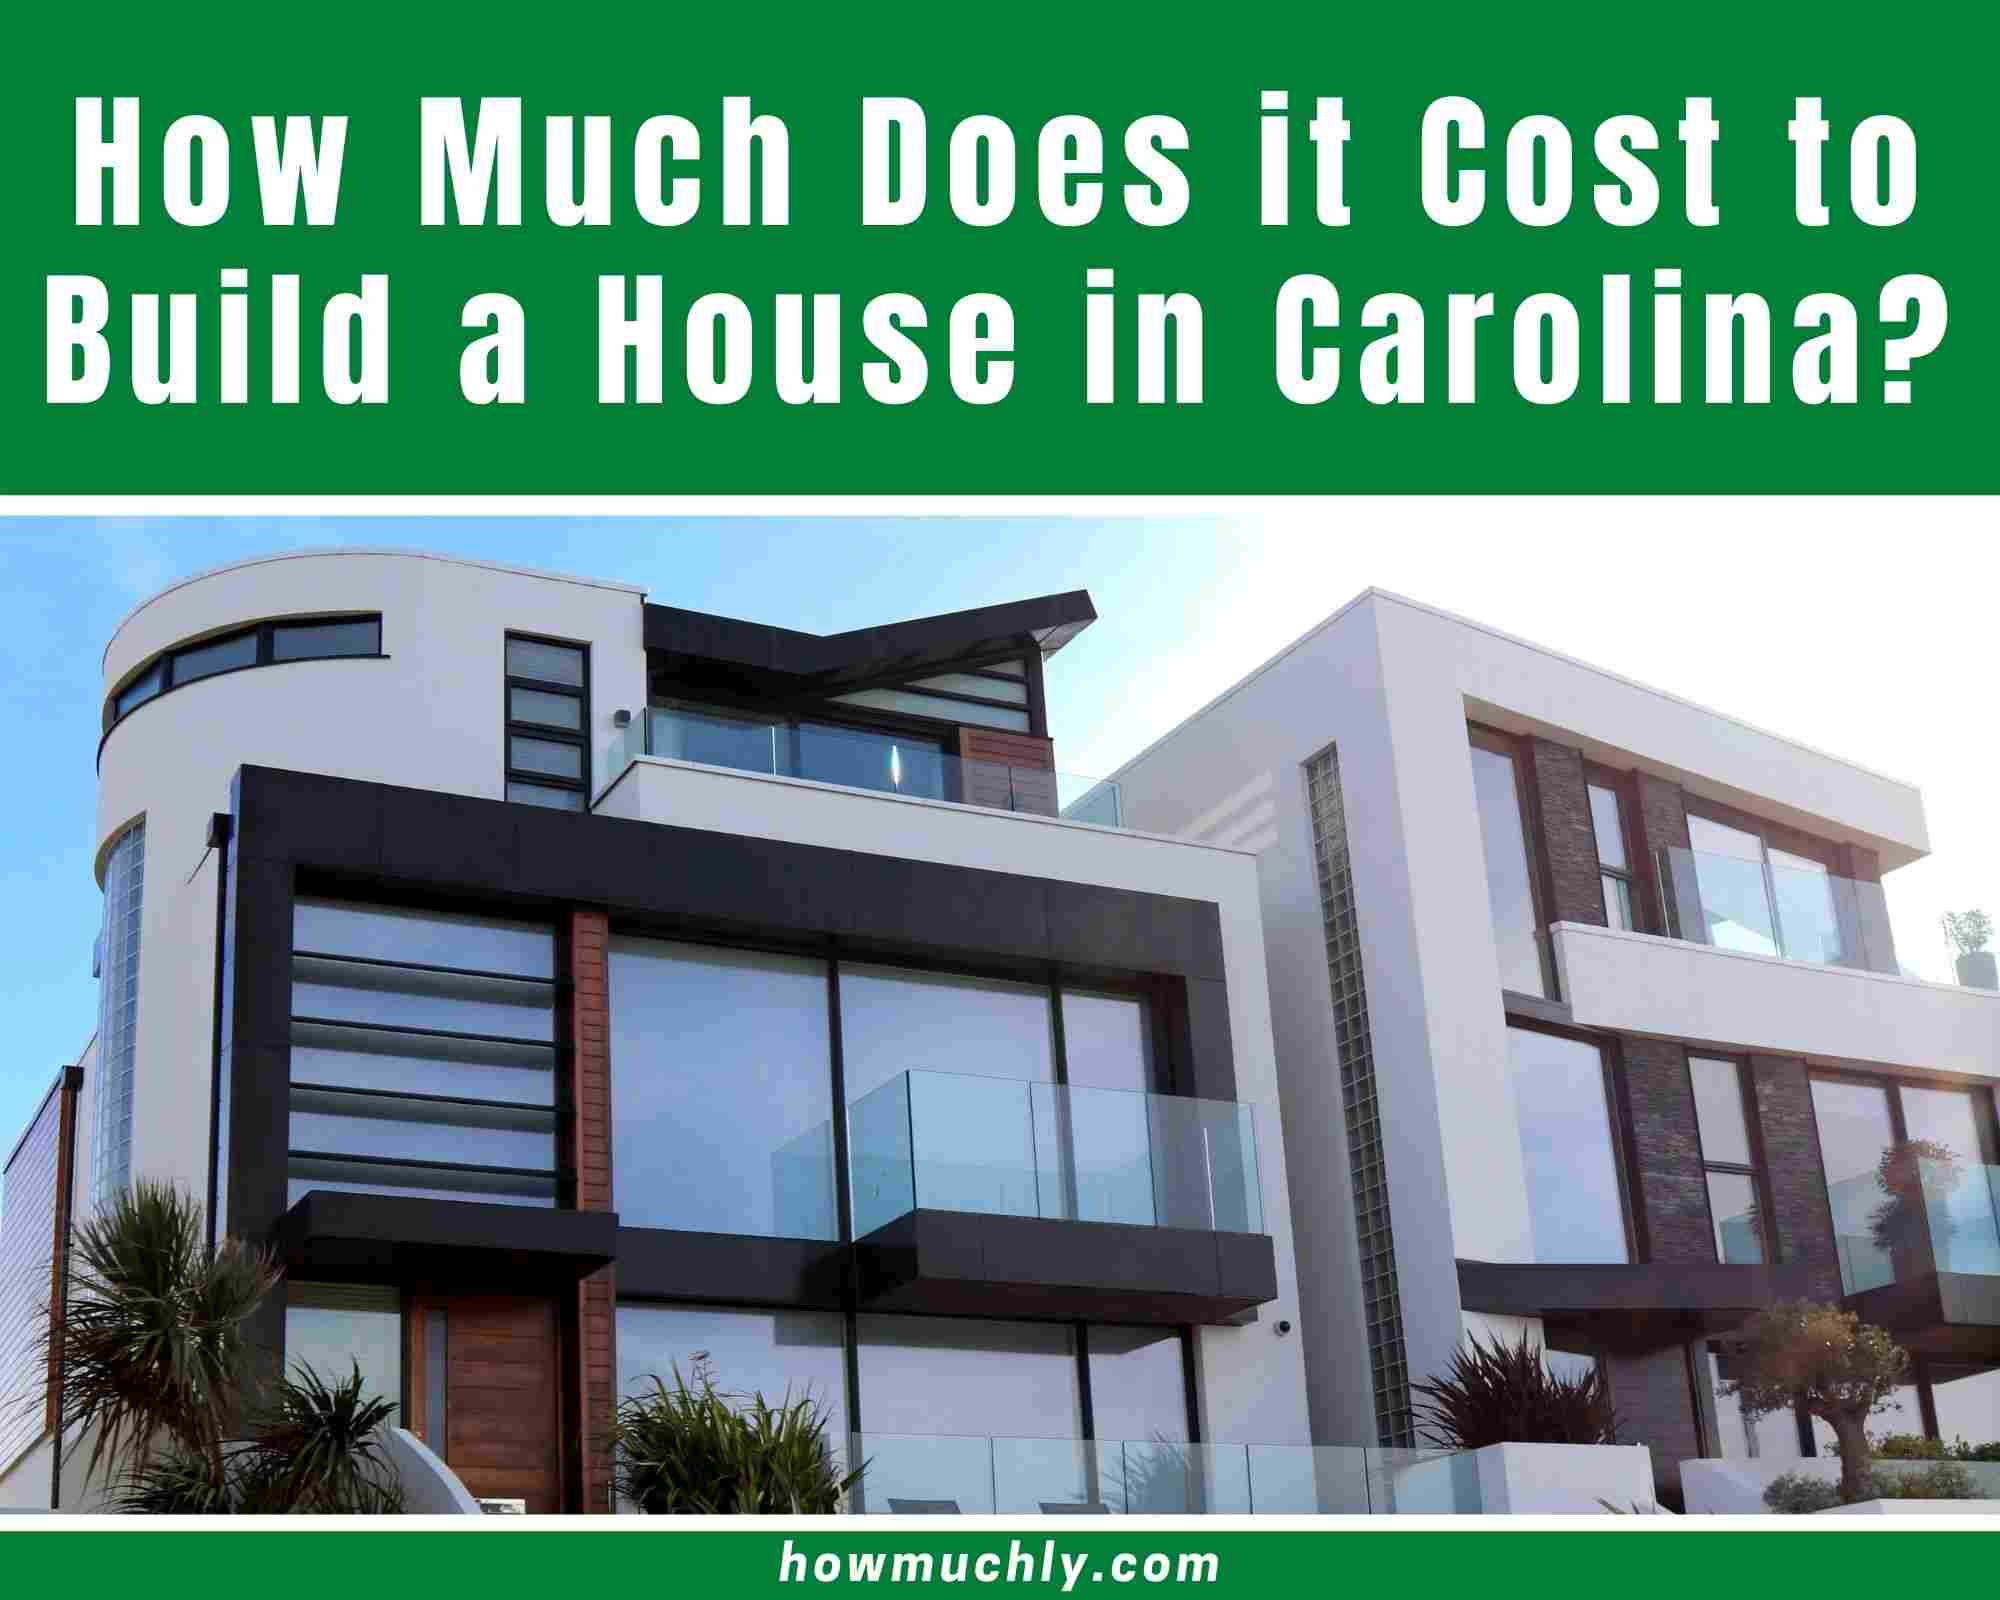 How Much Does it Cost to Build a House in Carolina? [NC & SC]